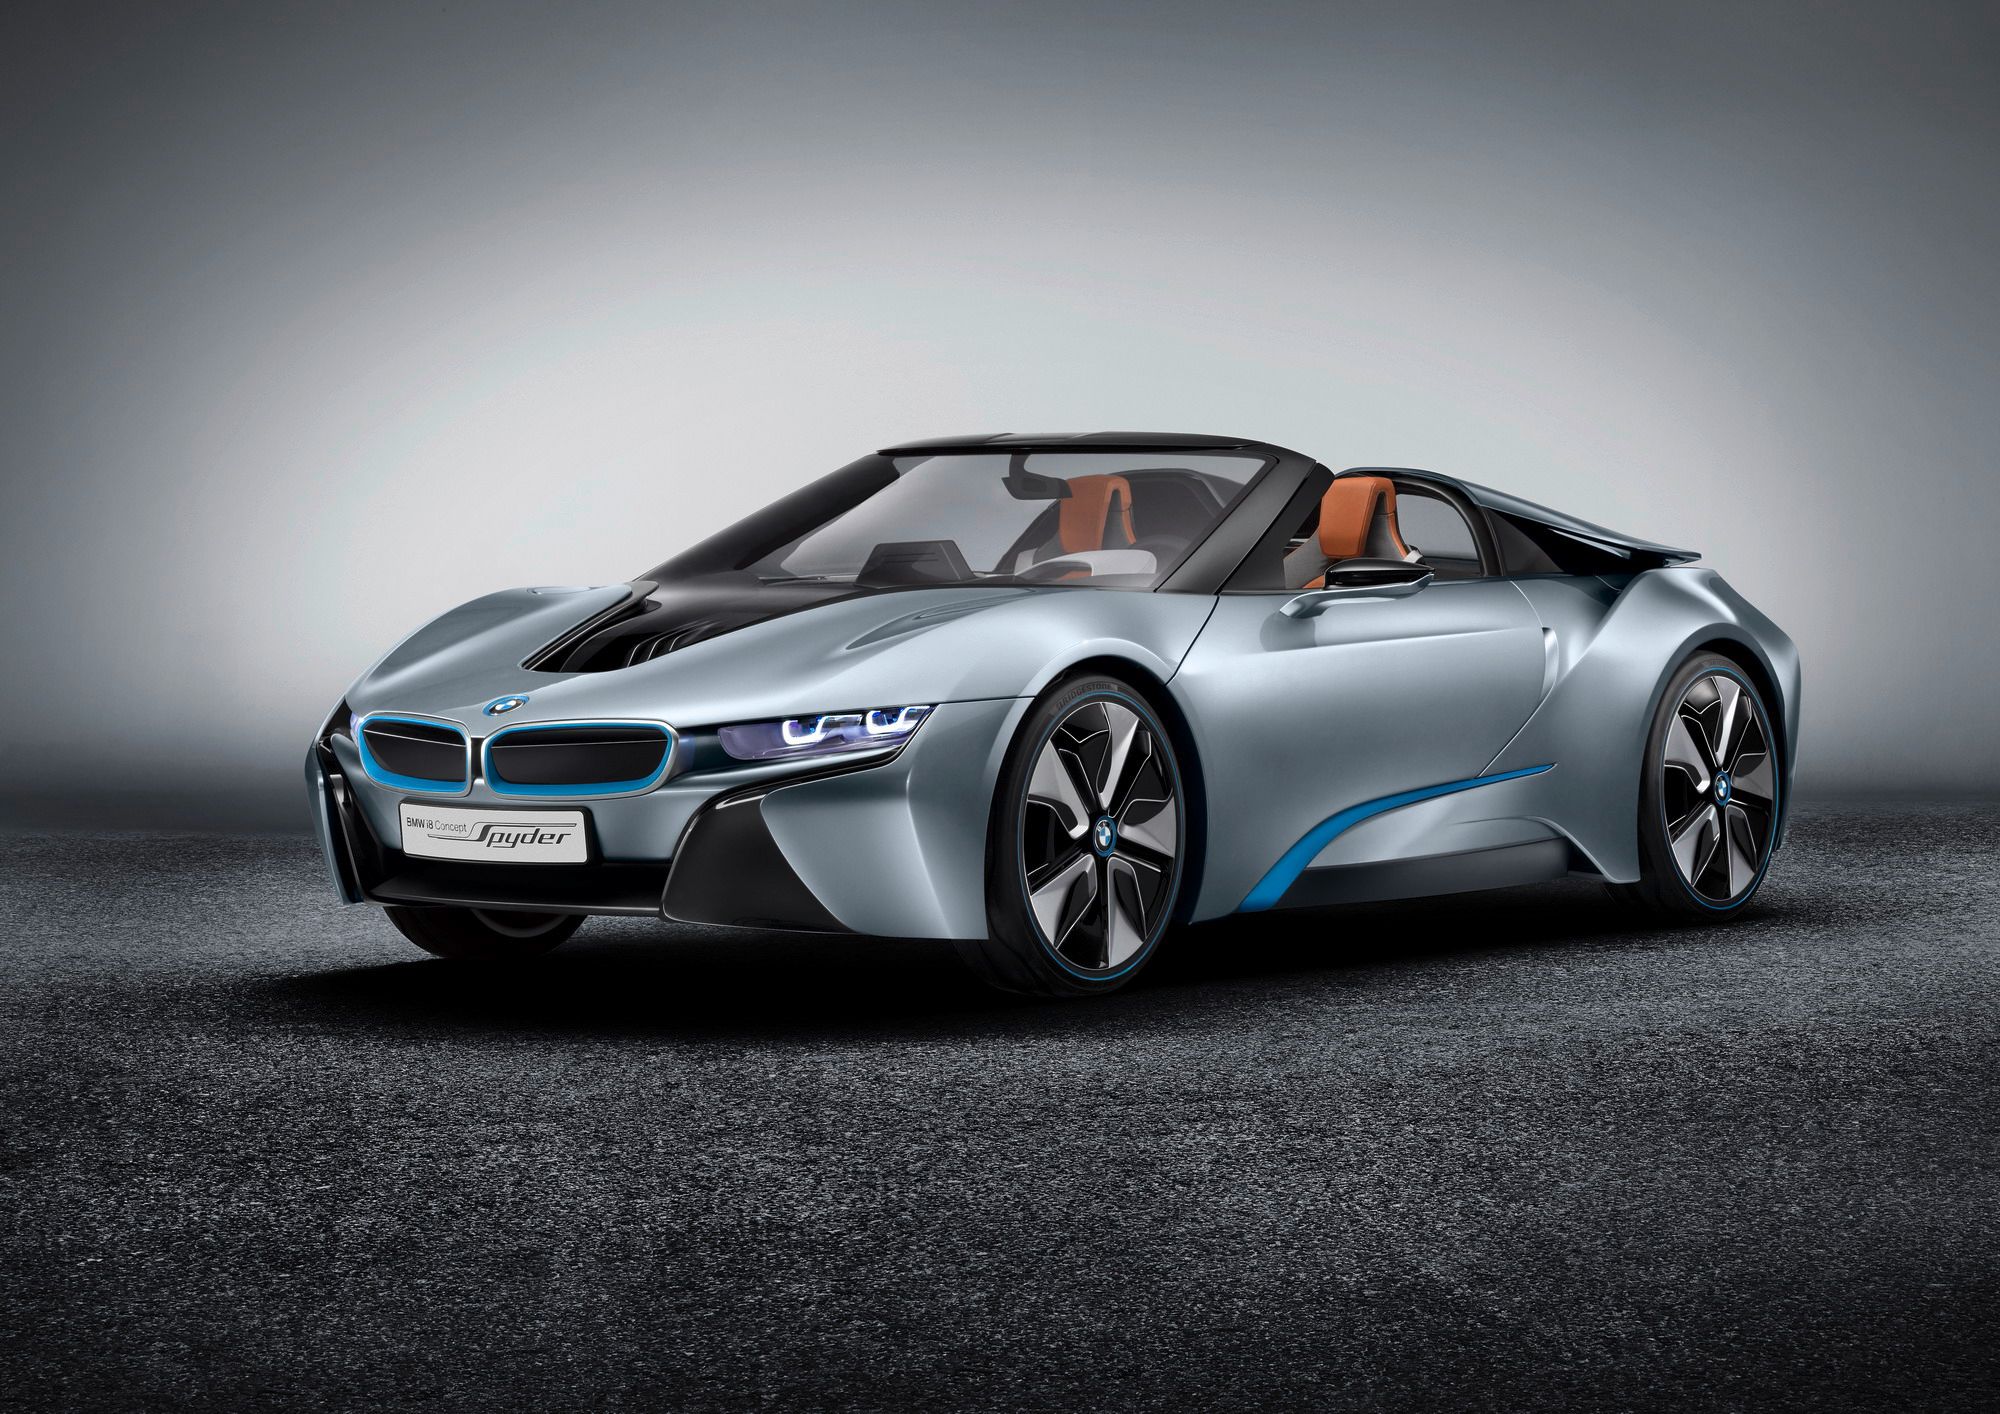 If you were waiting for the I8 Spyder too bad, this car will stay a concept for ever